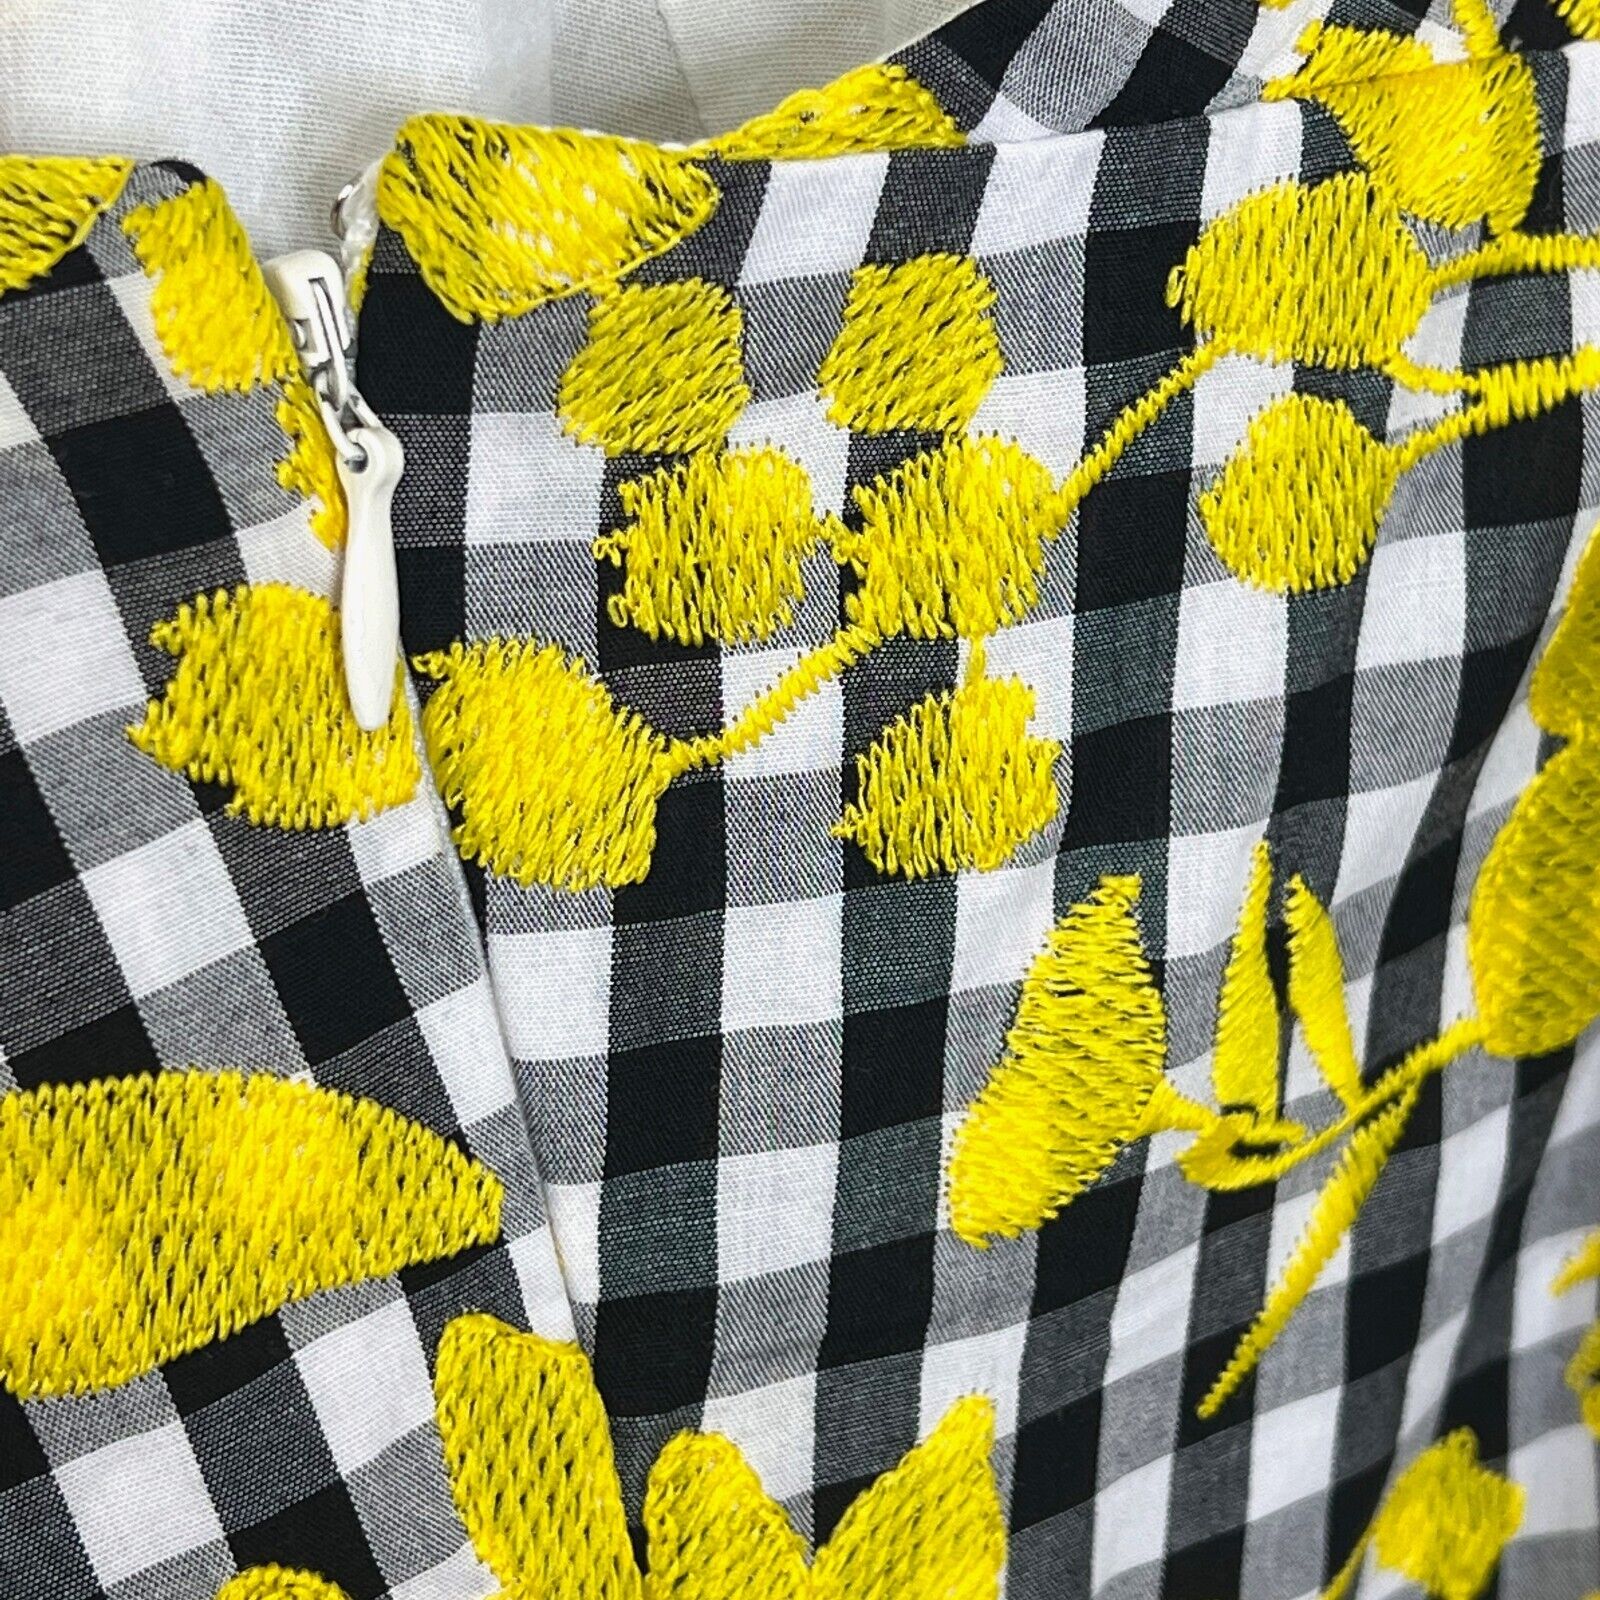 1901 Nordstrom Black White Gingham Yellow Floral Dress Size 4